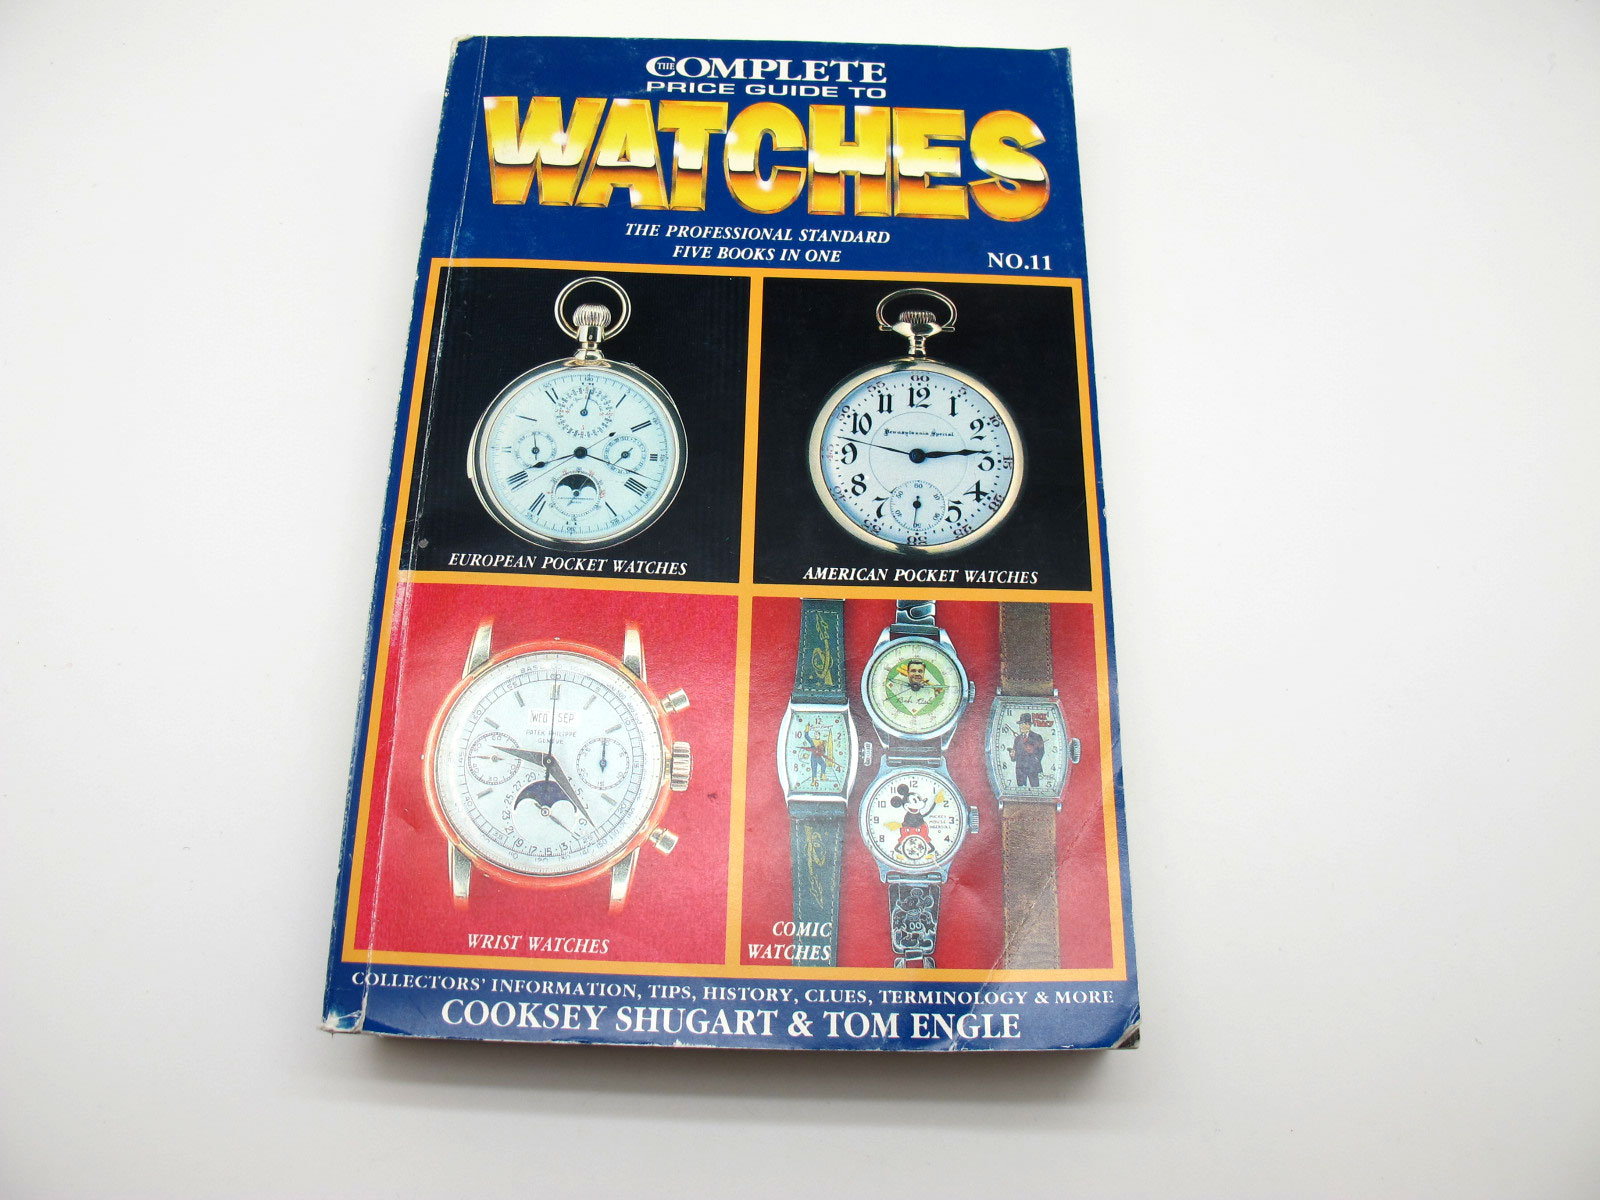 Swiss Watches and More Complete Price Guide to Watches Nr.11